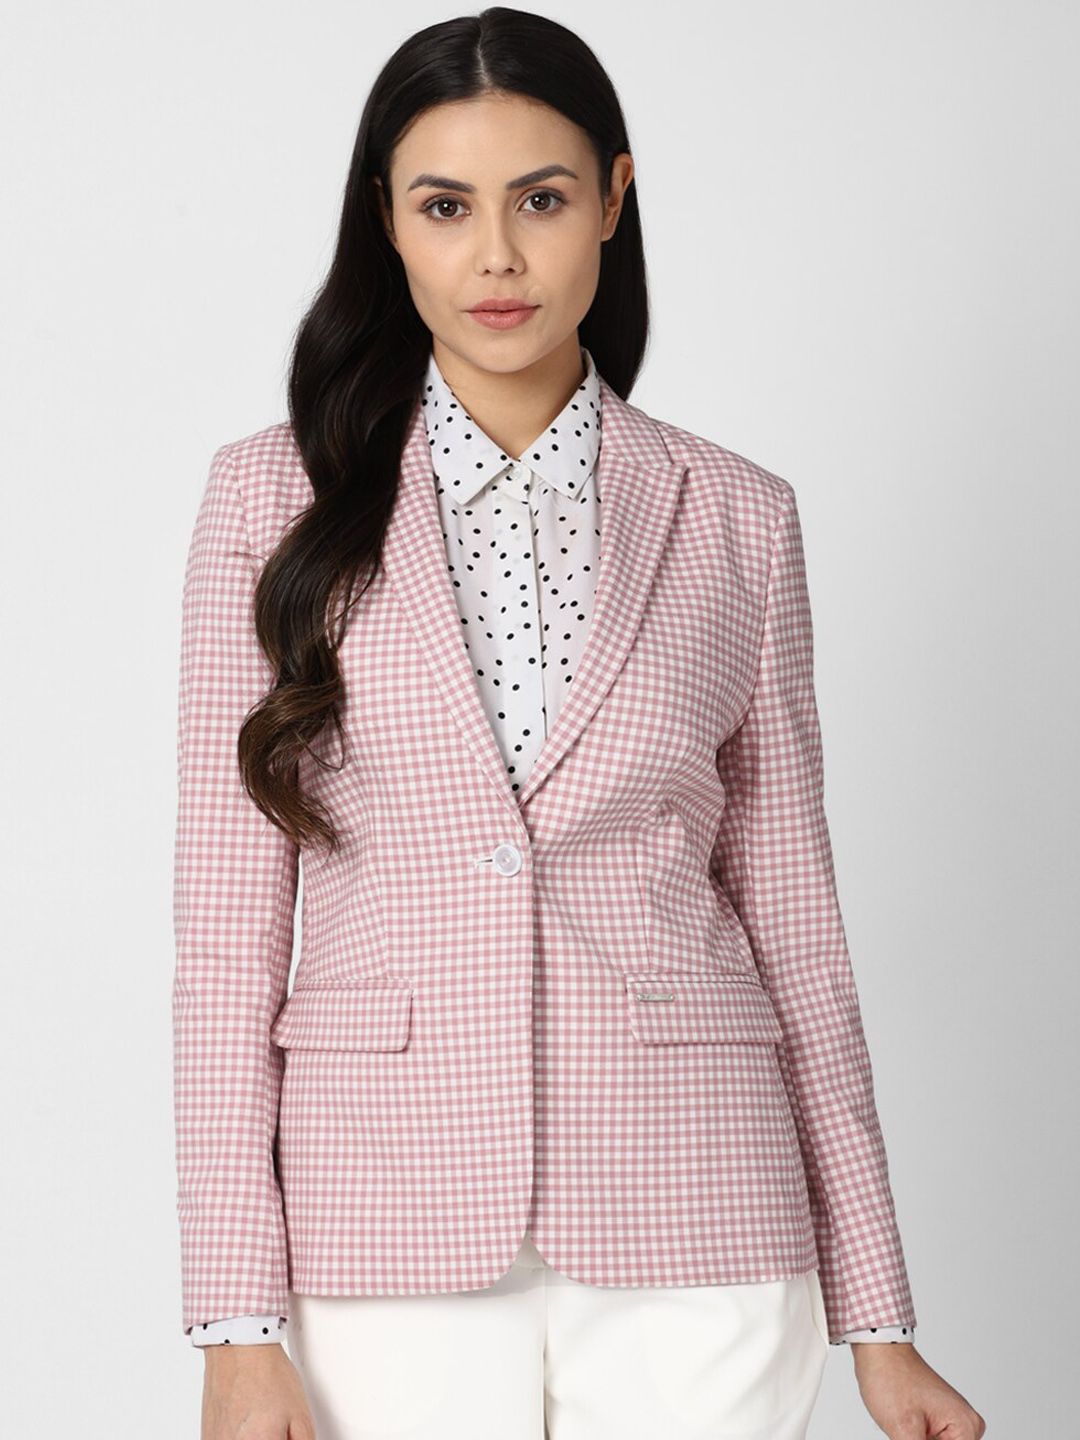 Van Heusen Woman Pink & White Checked Single-Breasted Casual Blazer Price in India